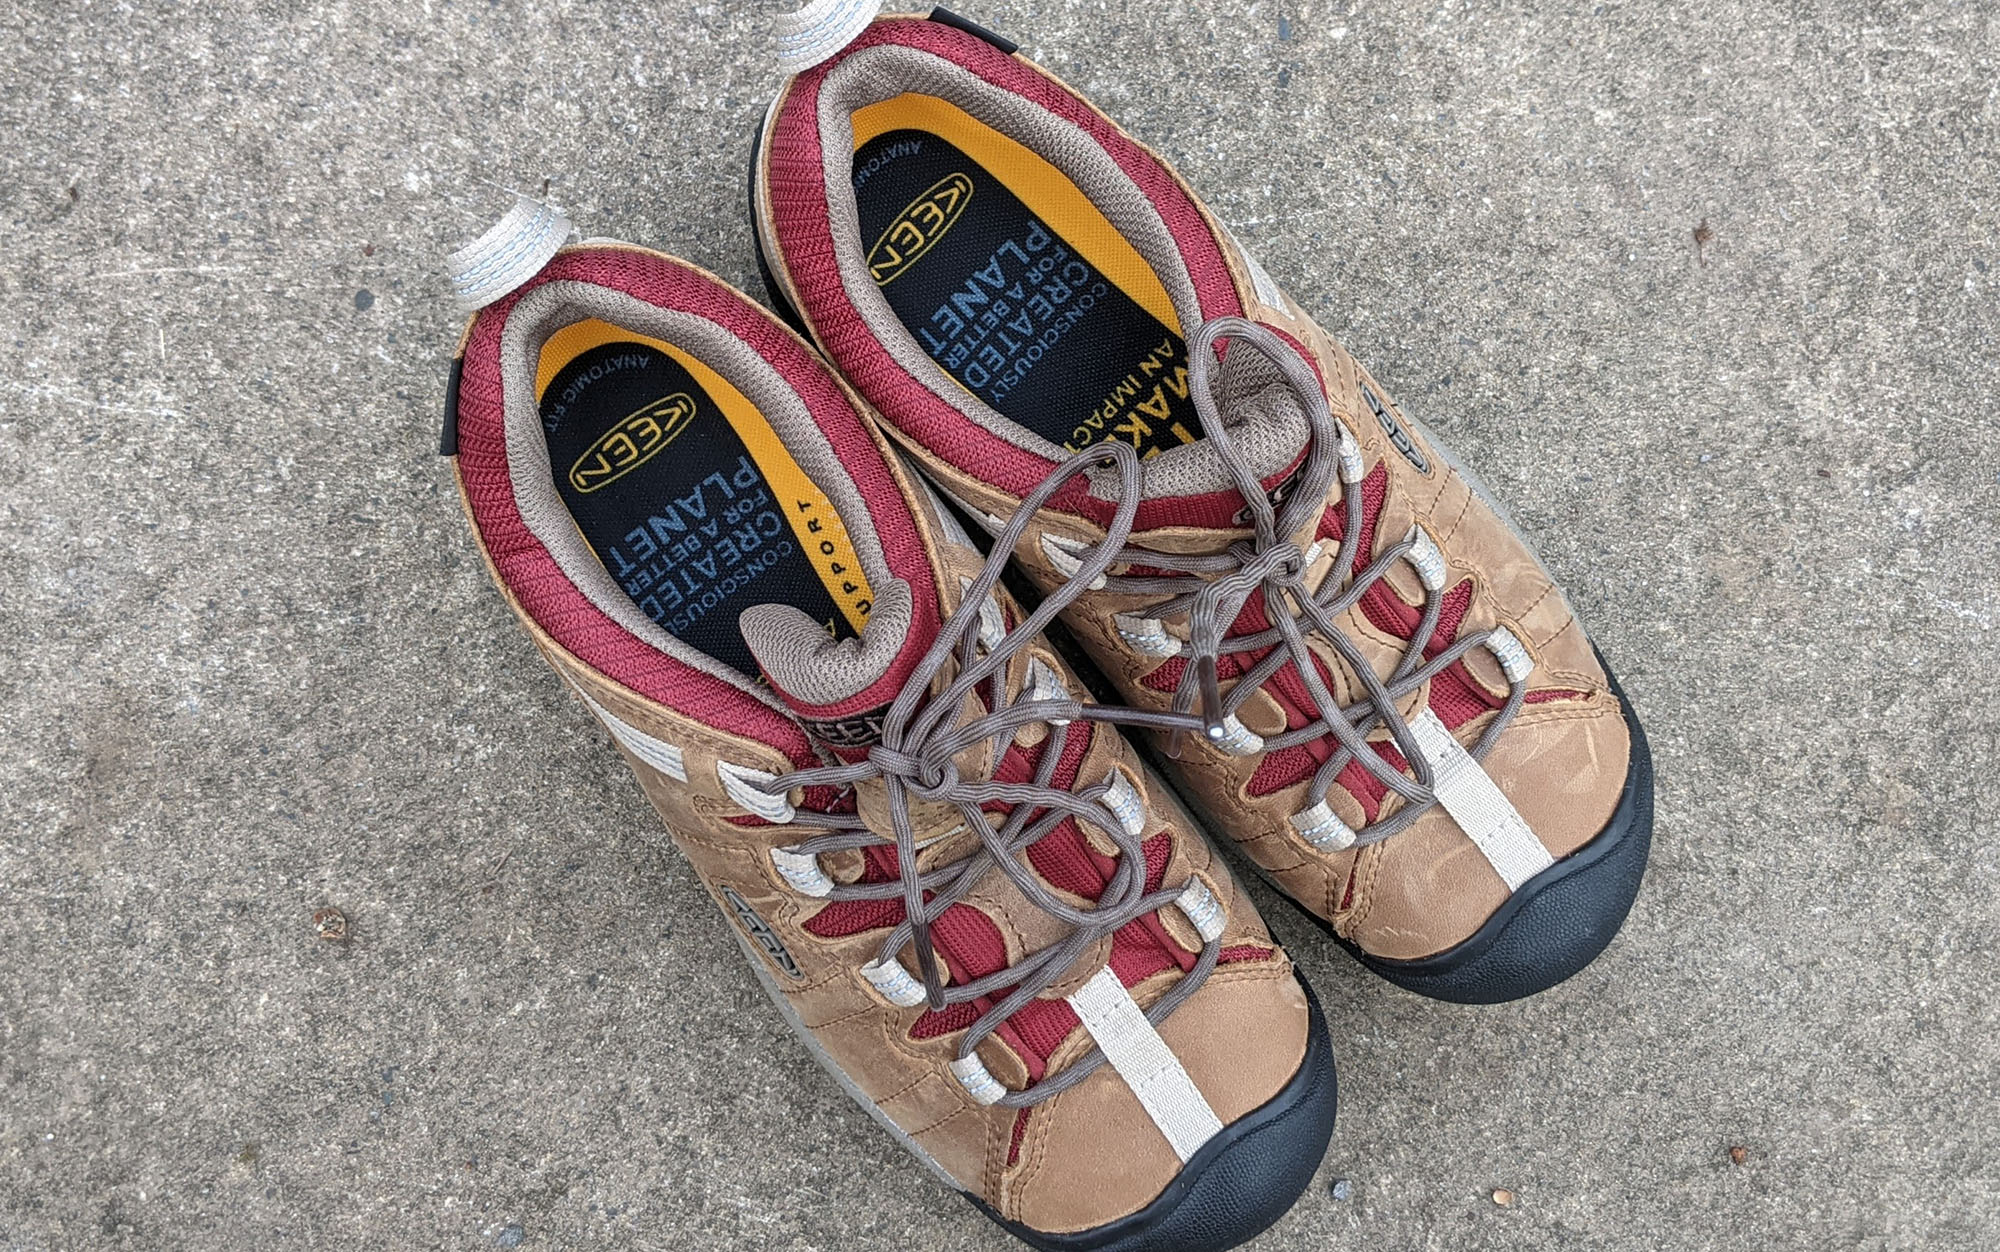 The KEEN Targhee are the best overall hiking shoe for wide feet.